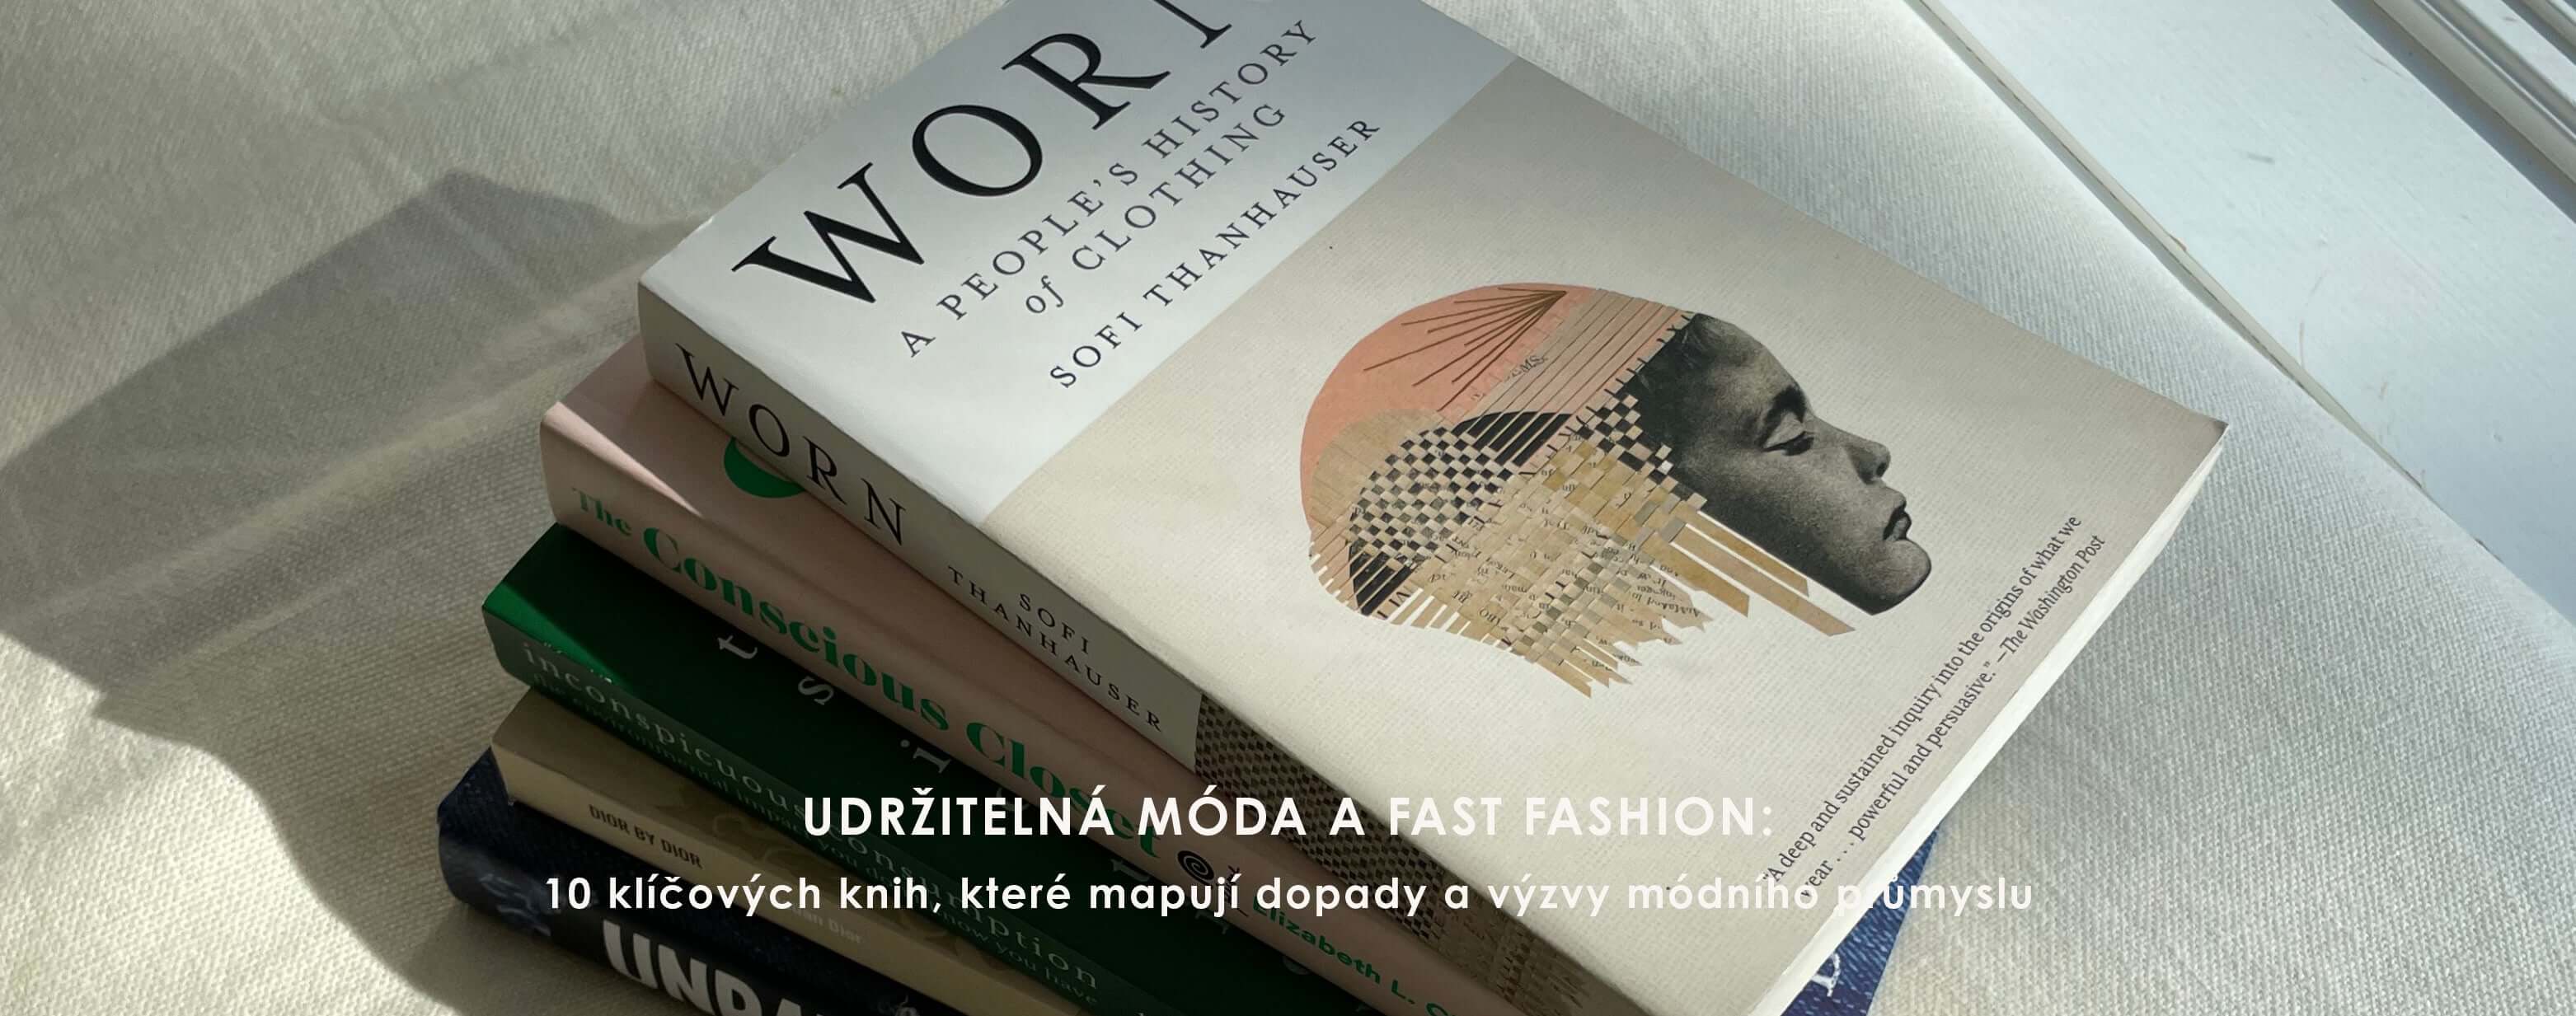 10 must read books about sustainable fashion and fast fashion issues